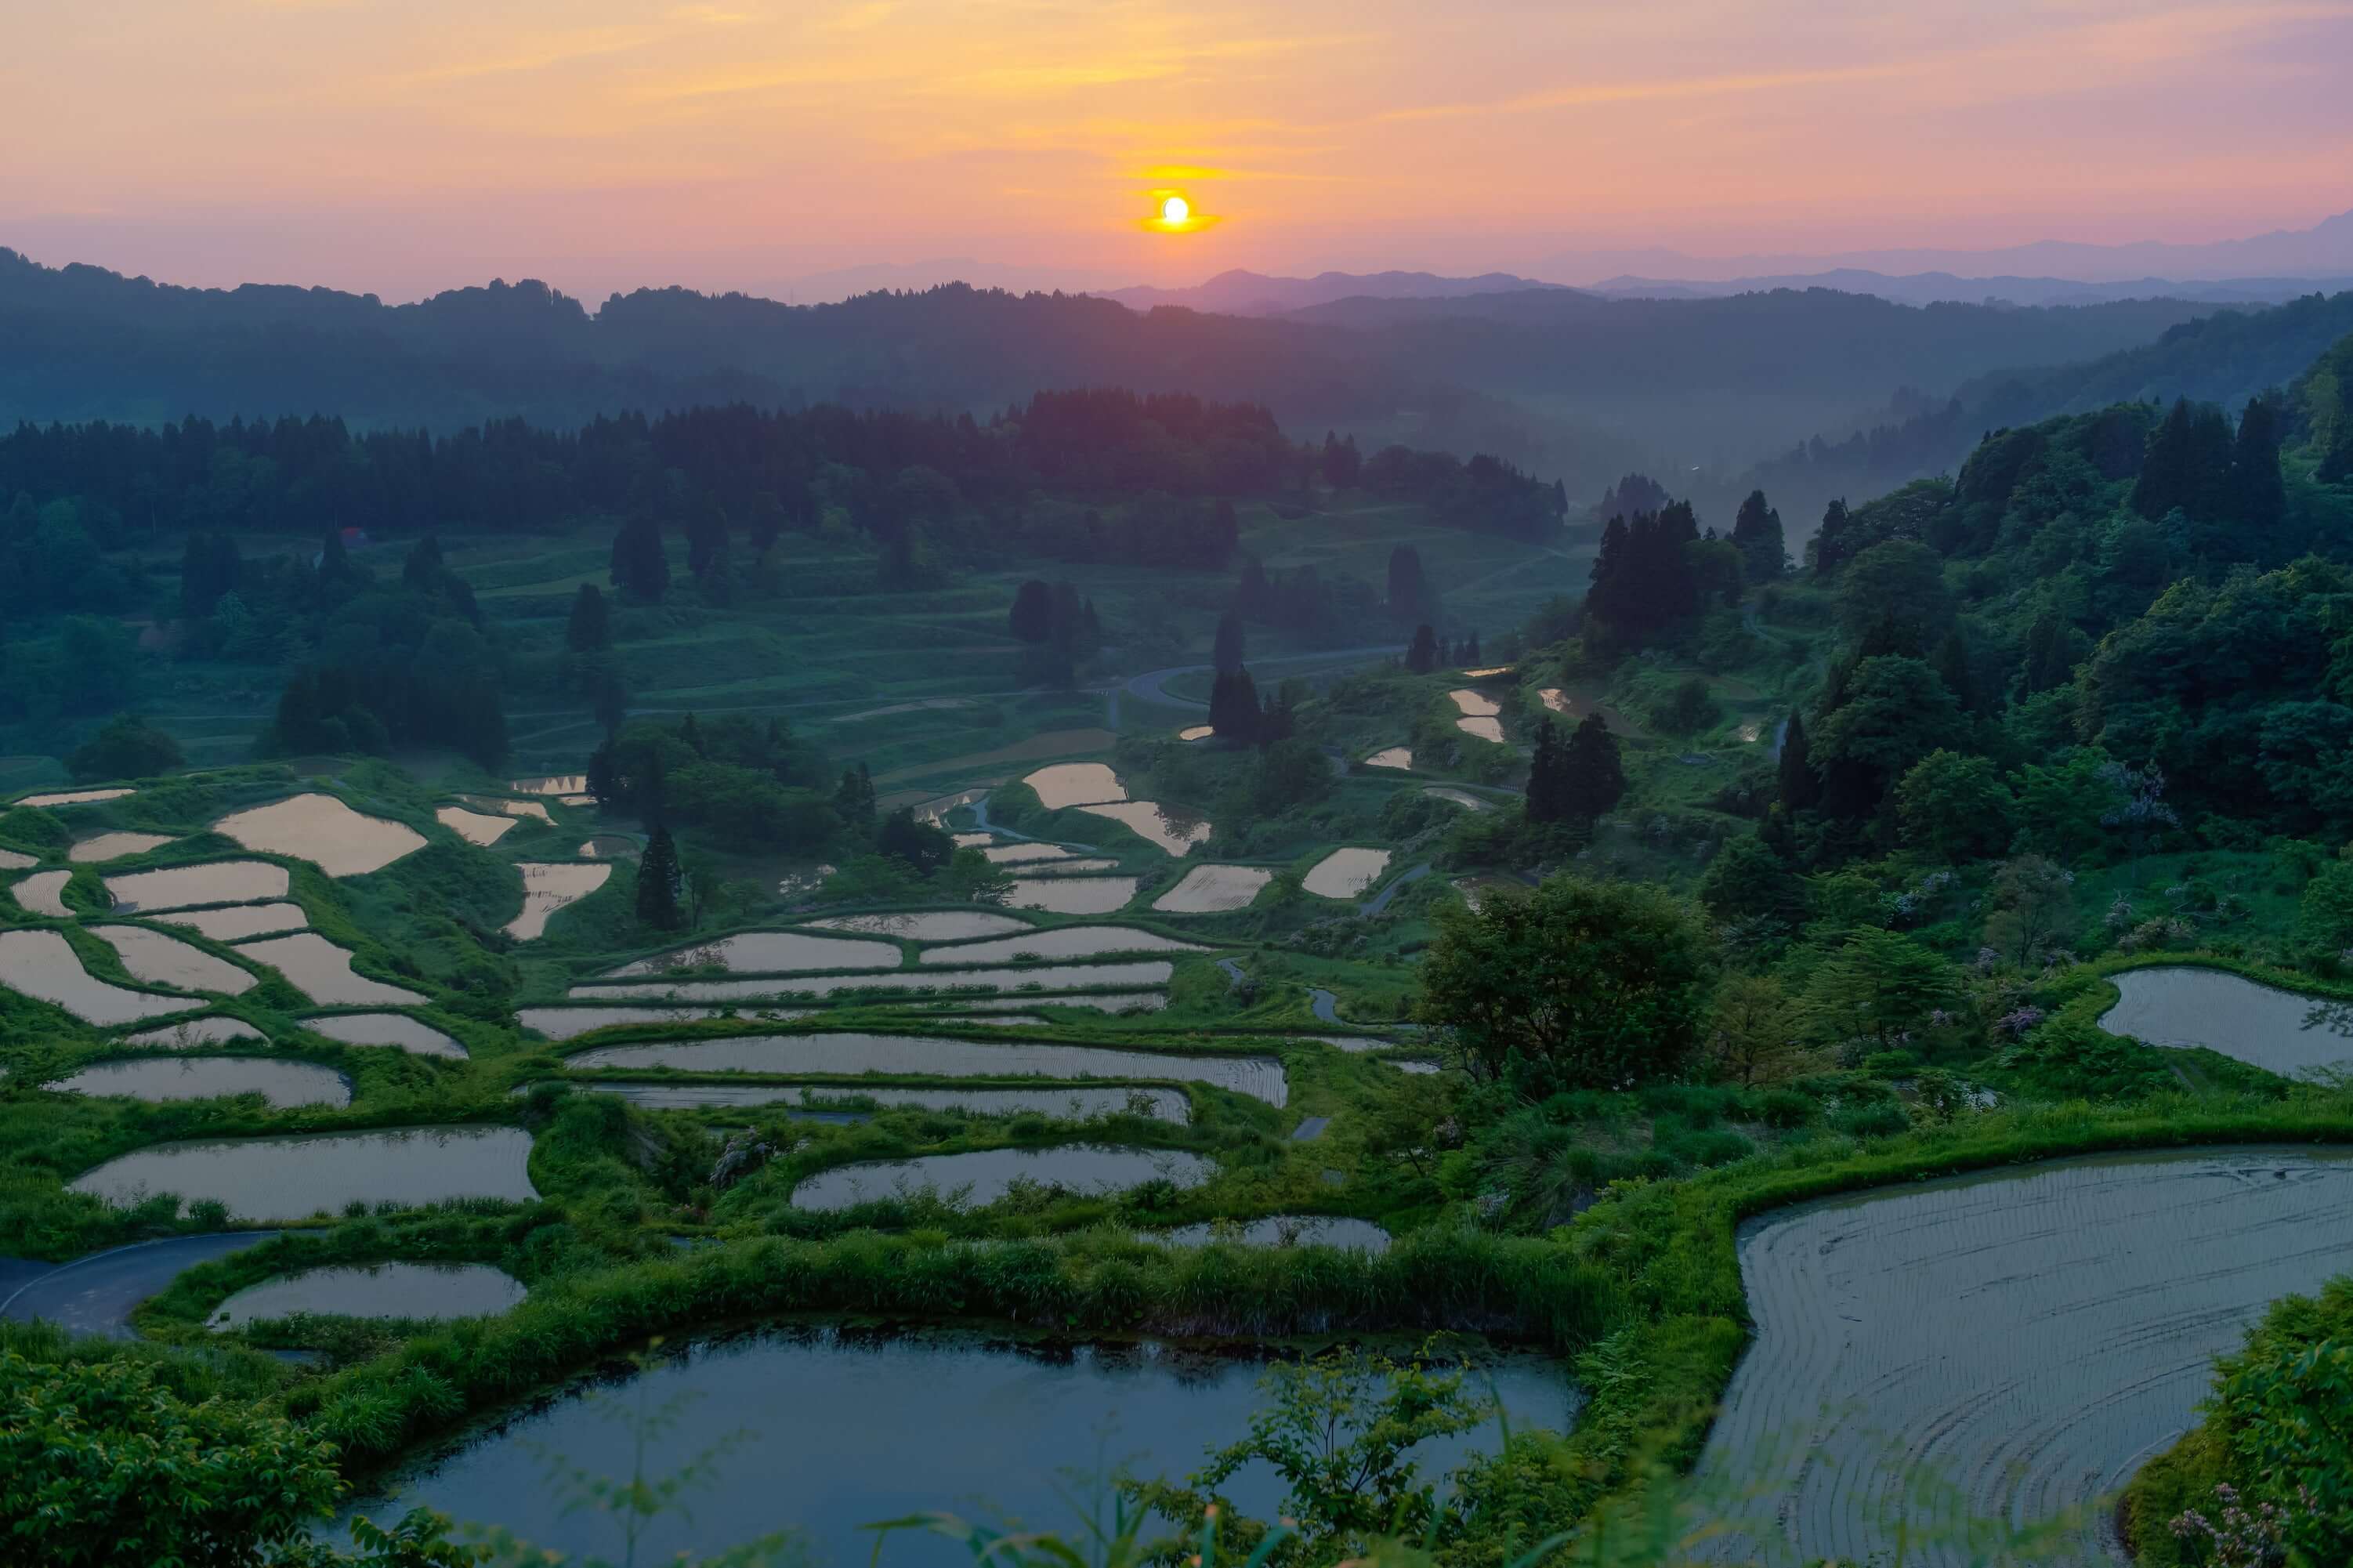 Rice terraces in Niigata, which is the top producing region for sake quality rice grains. Niigata is also home to top sake breweries that produce the best sake and sake lees for beverage and skincare use.